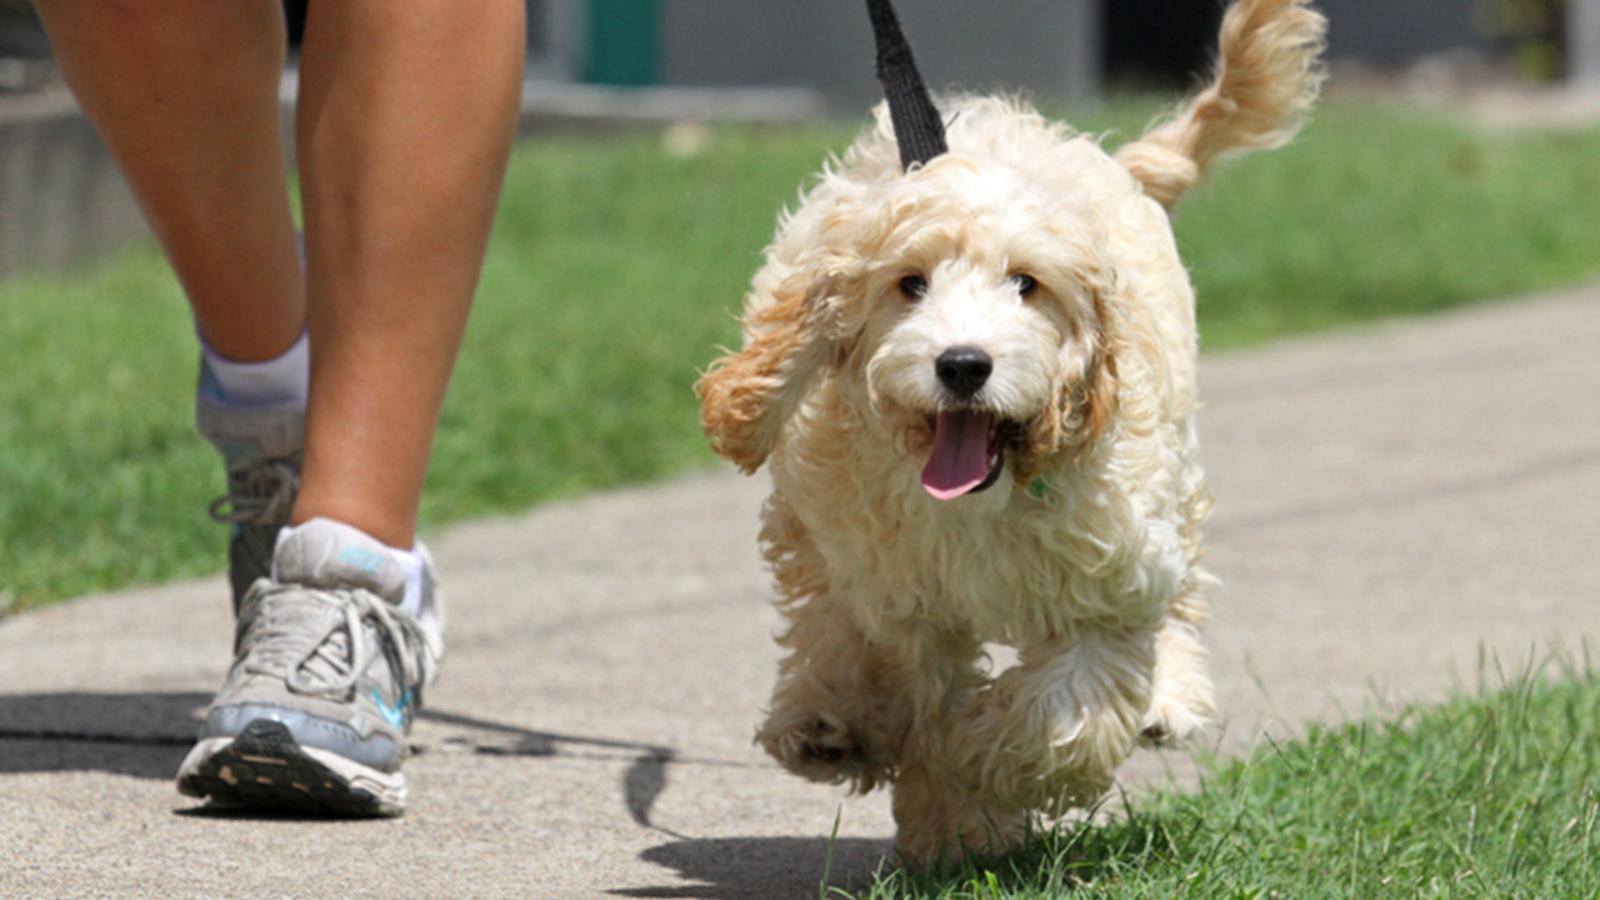 5 Second Trick To Tell If It's Too Hot To Walk Your Dog